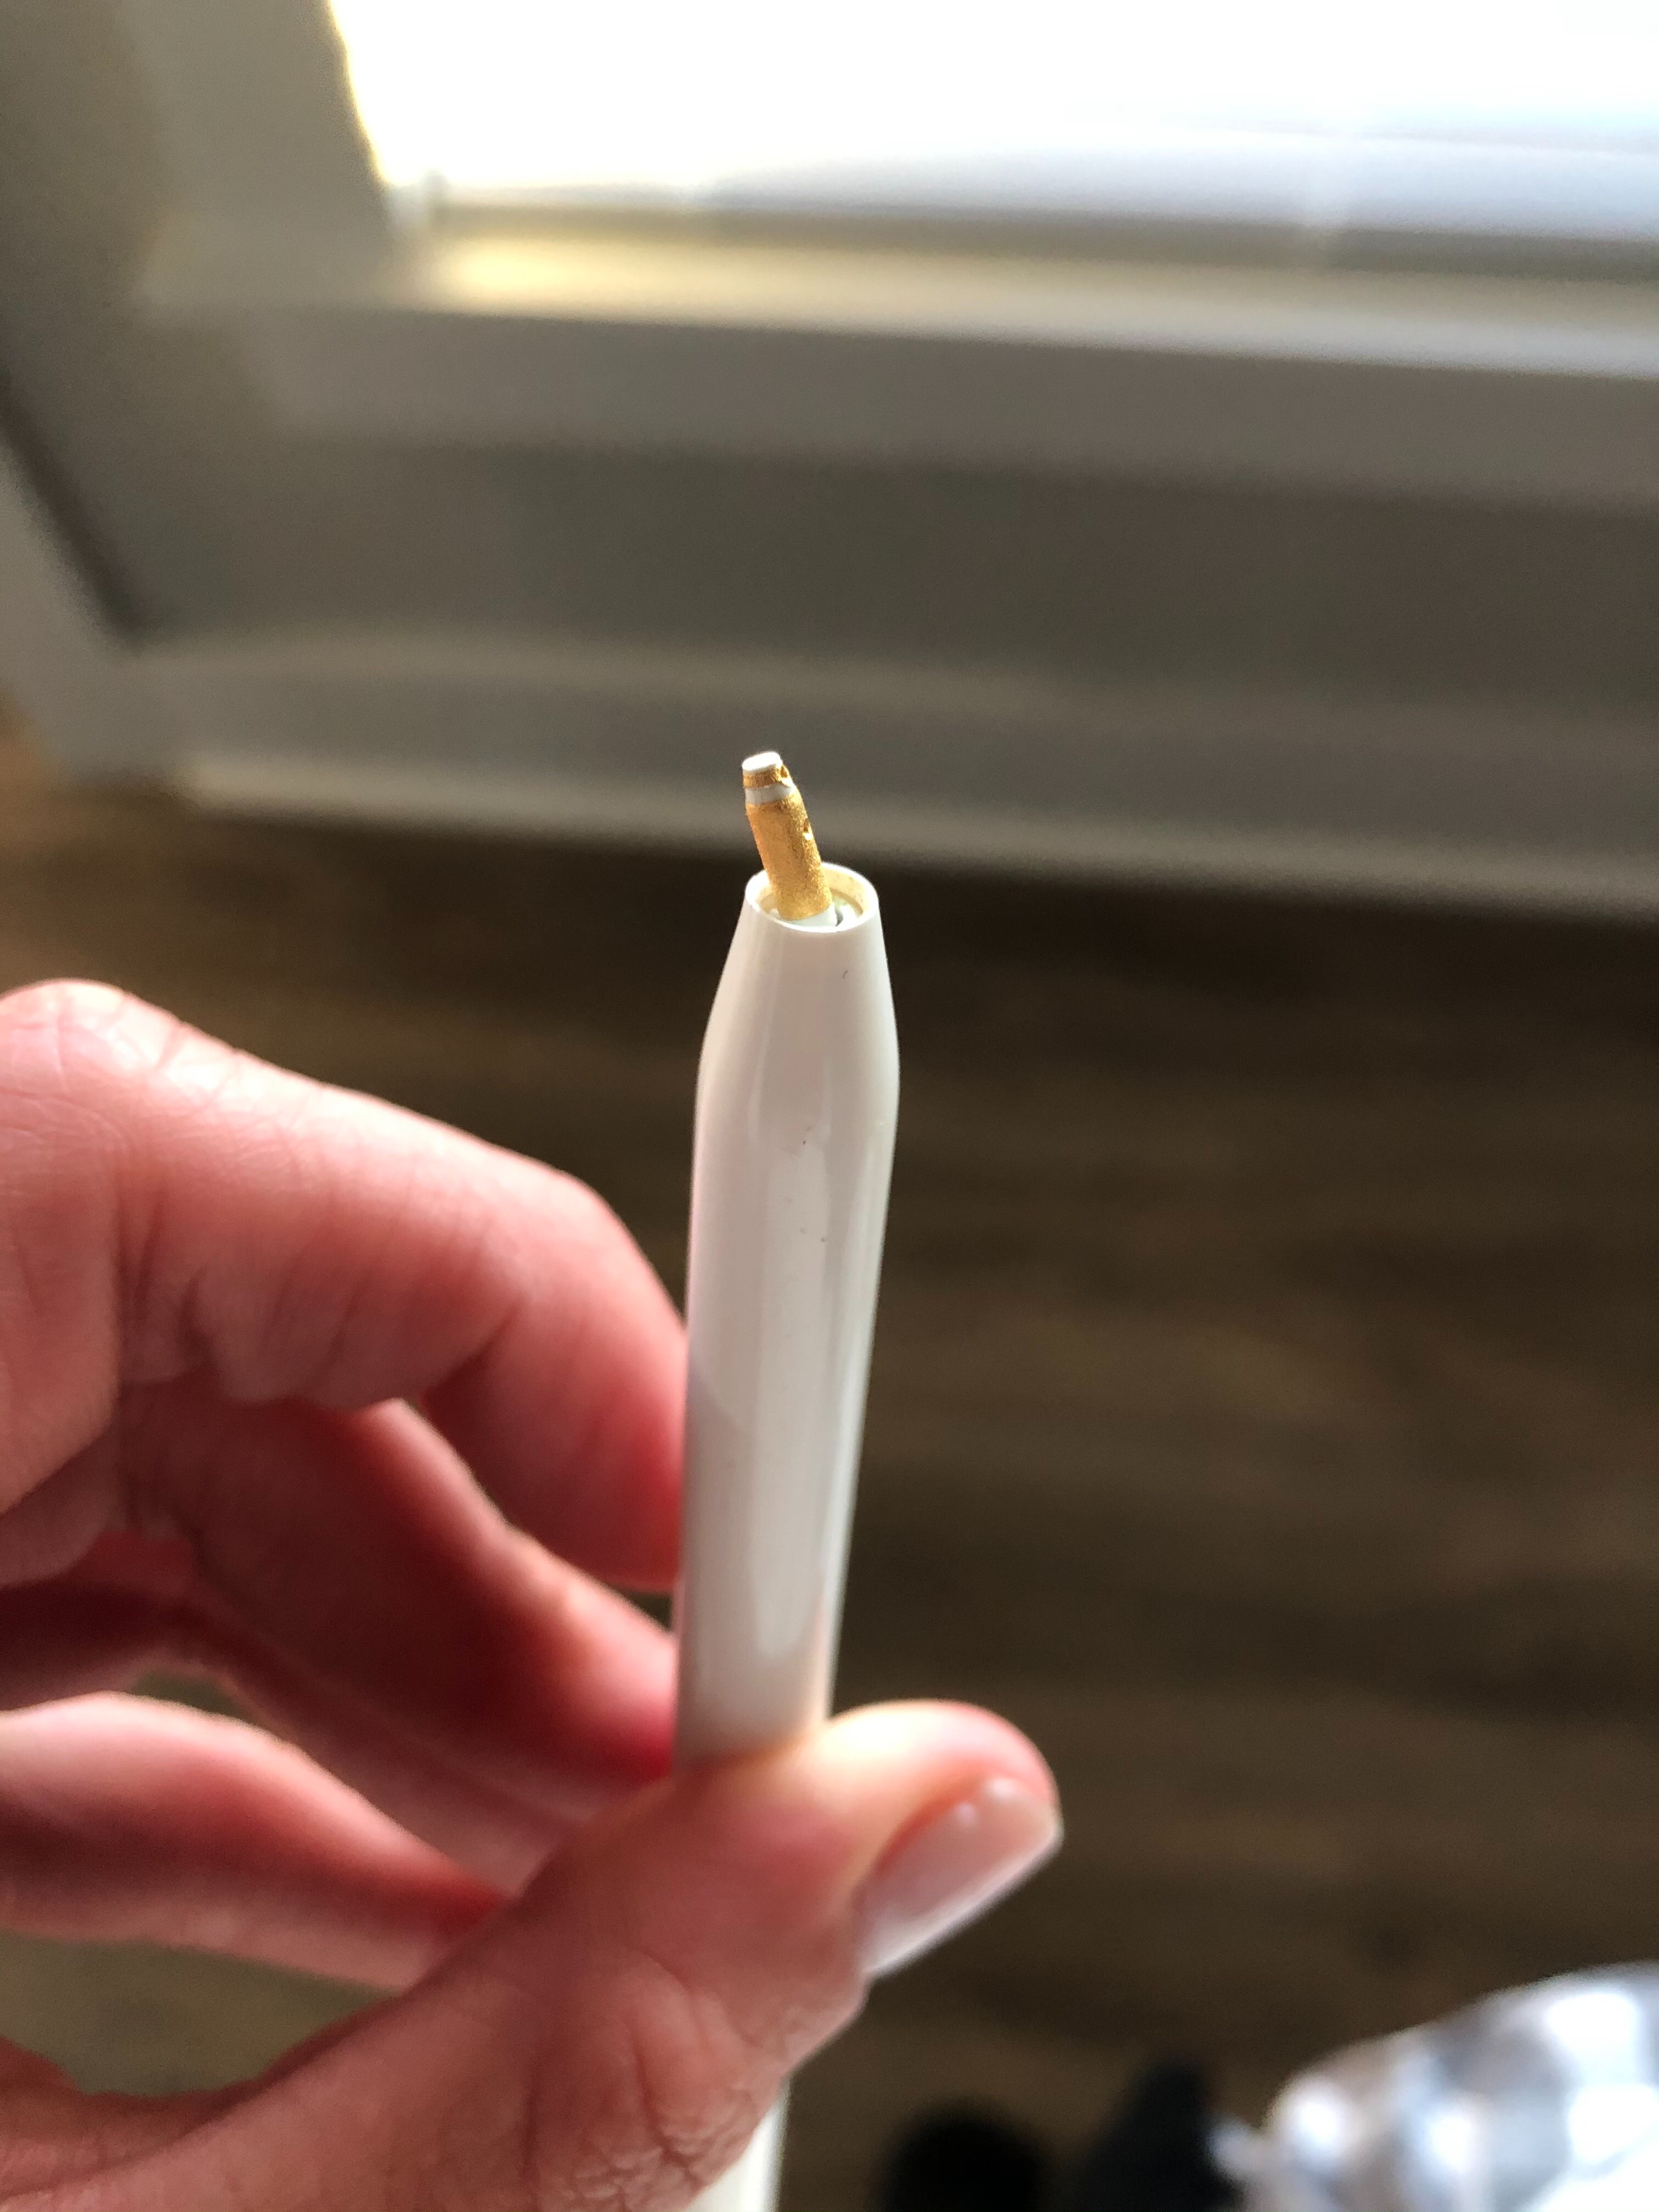 How do I know if my Apple Pencil 2 is broken?